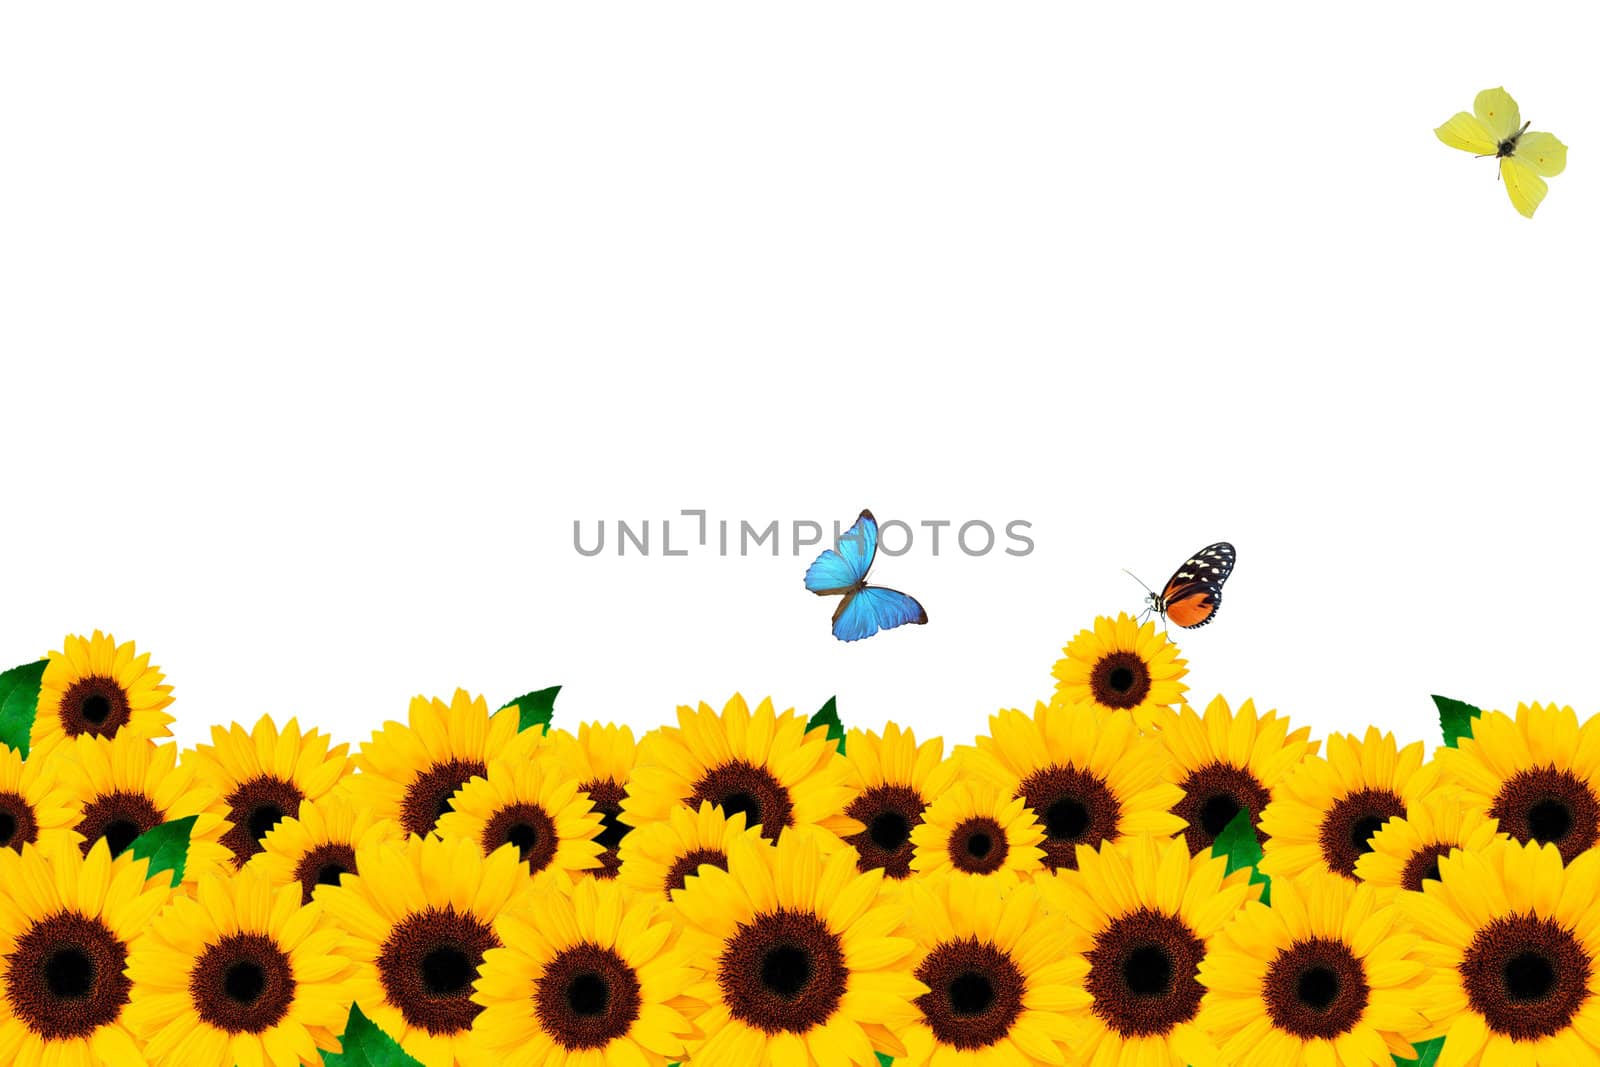 Sunflower and butterfly by petrkurgan